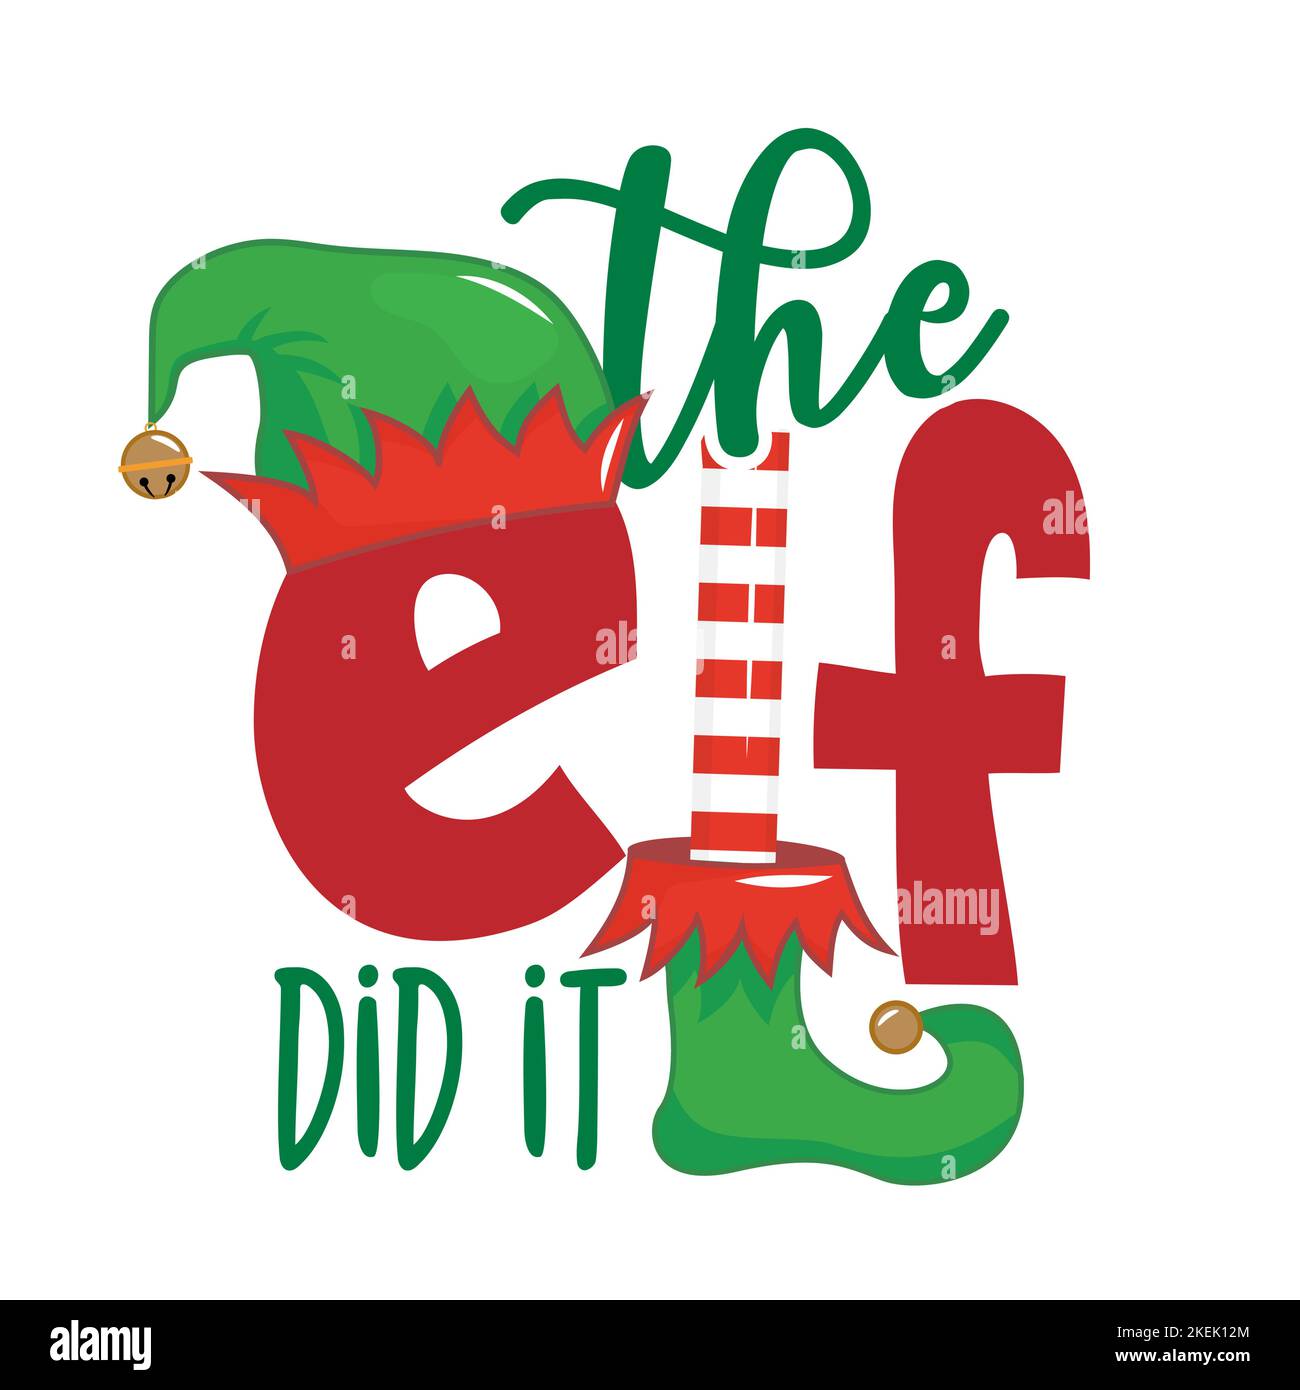 https://c8.alamy.com/comp/2KEK12M/the-elf-did-it-phrase-for-christmas-clothes-or-ugly-sweaters-hand-drawn-lettering-for-xmas-greetings-cards-invitations-good-for-shirts-mug-gift-2KEK12M.jpg